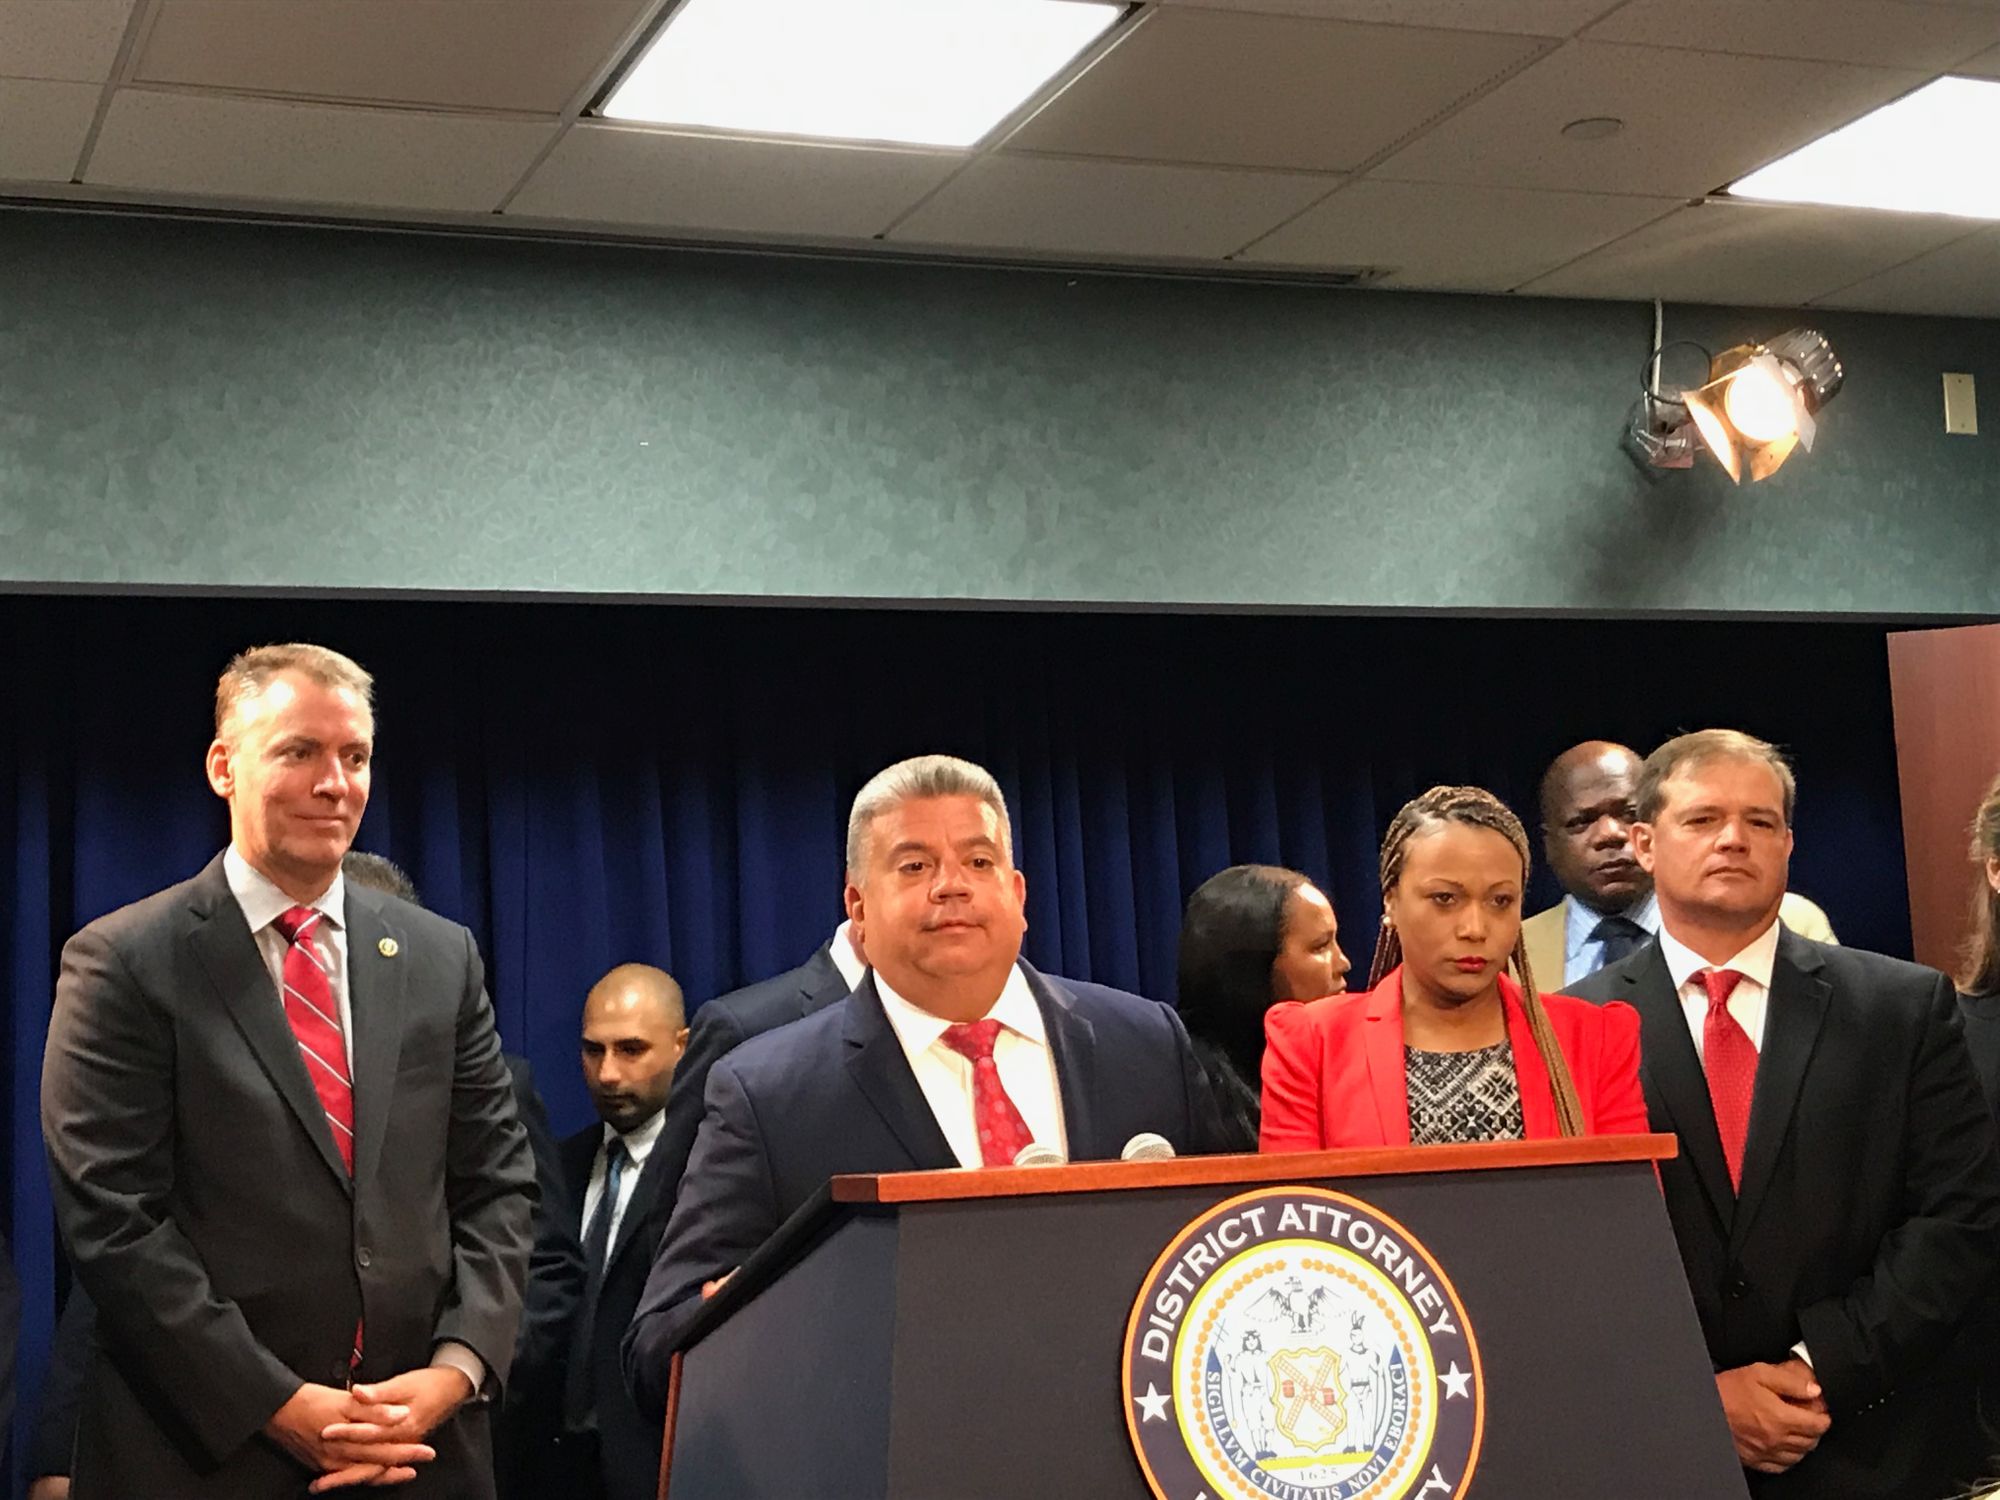 DA Eric Gonzalez Defends Diversion Program NYPD Says Is Used Too Often When Guns Are Involved